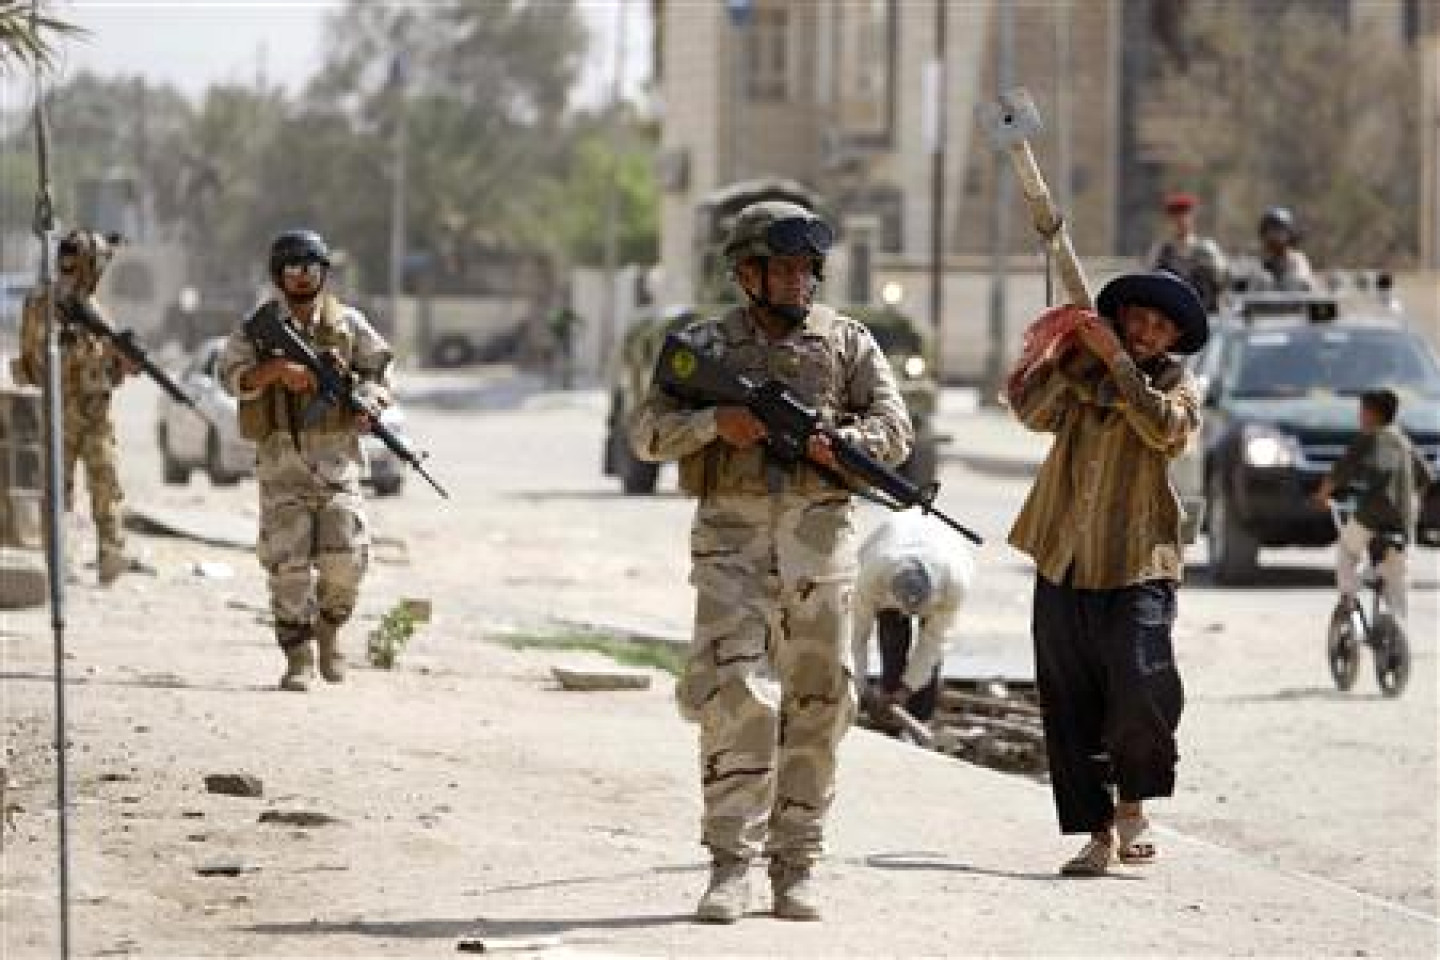 Soldiers patrol along a street during a security operation in Basra